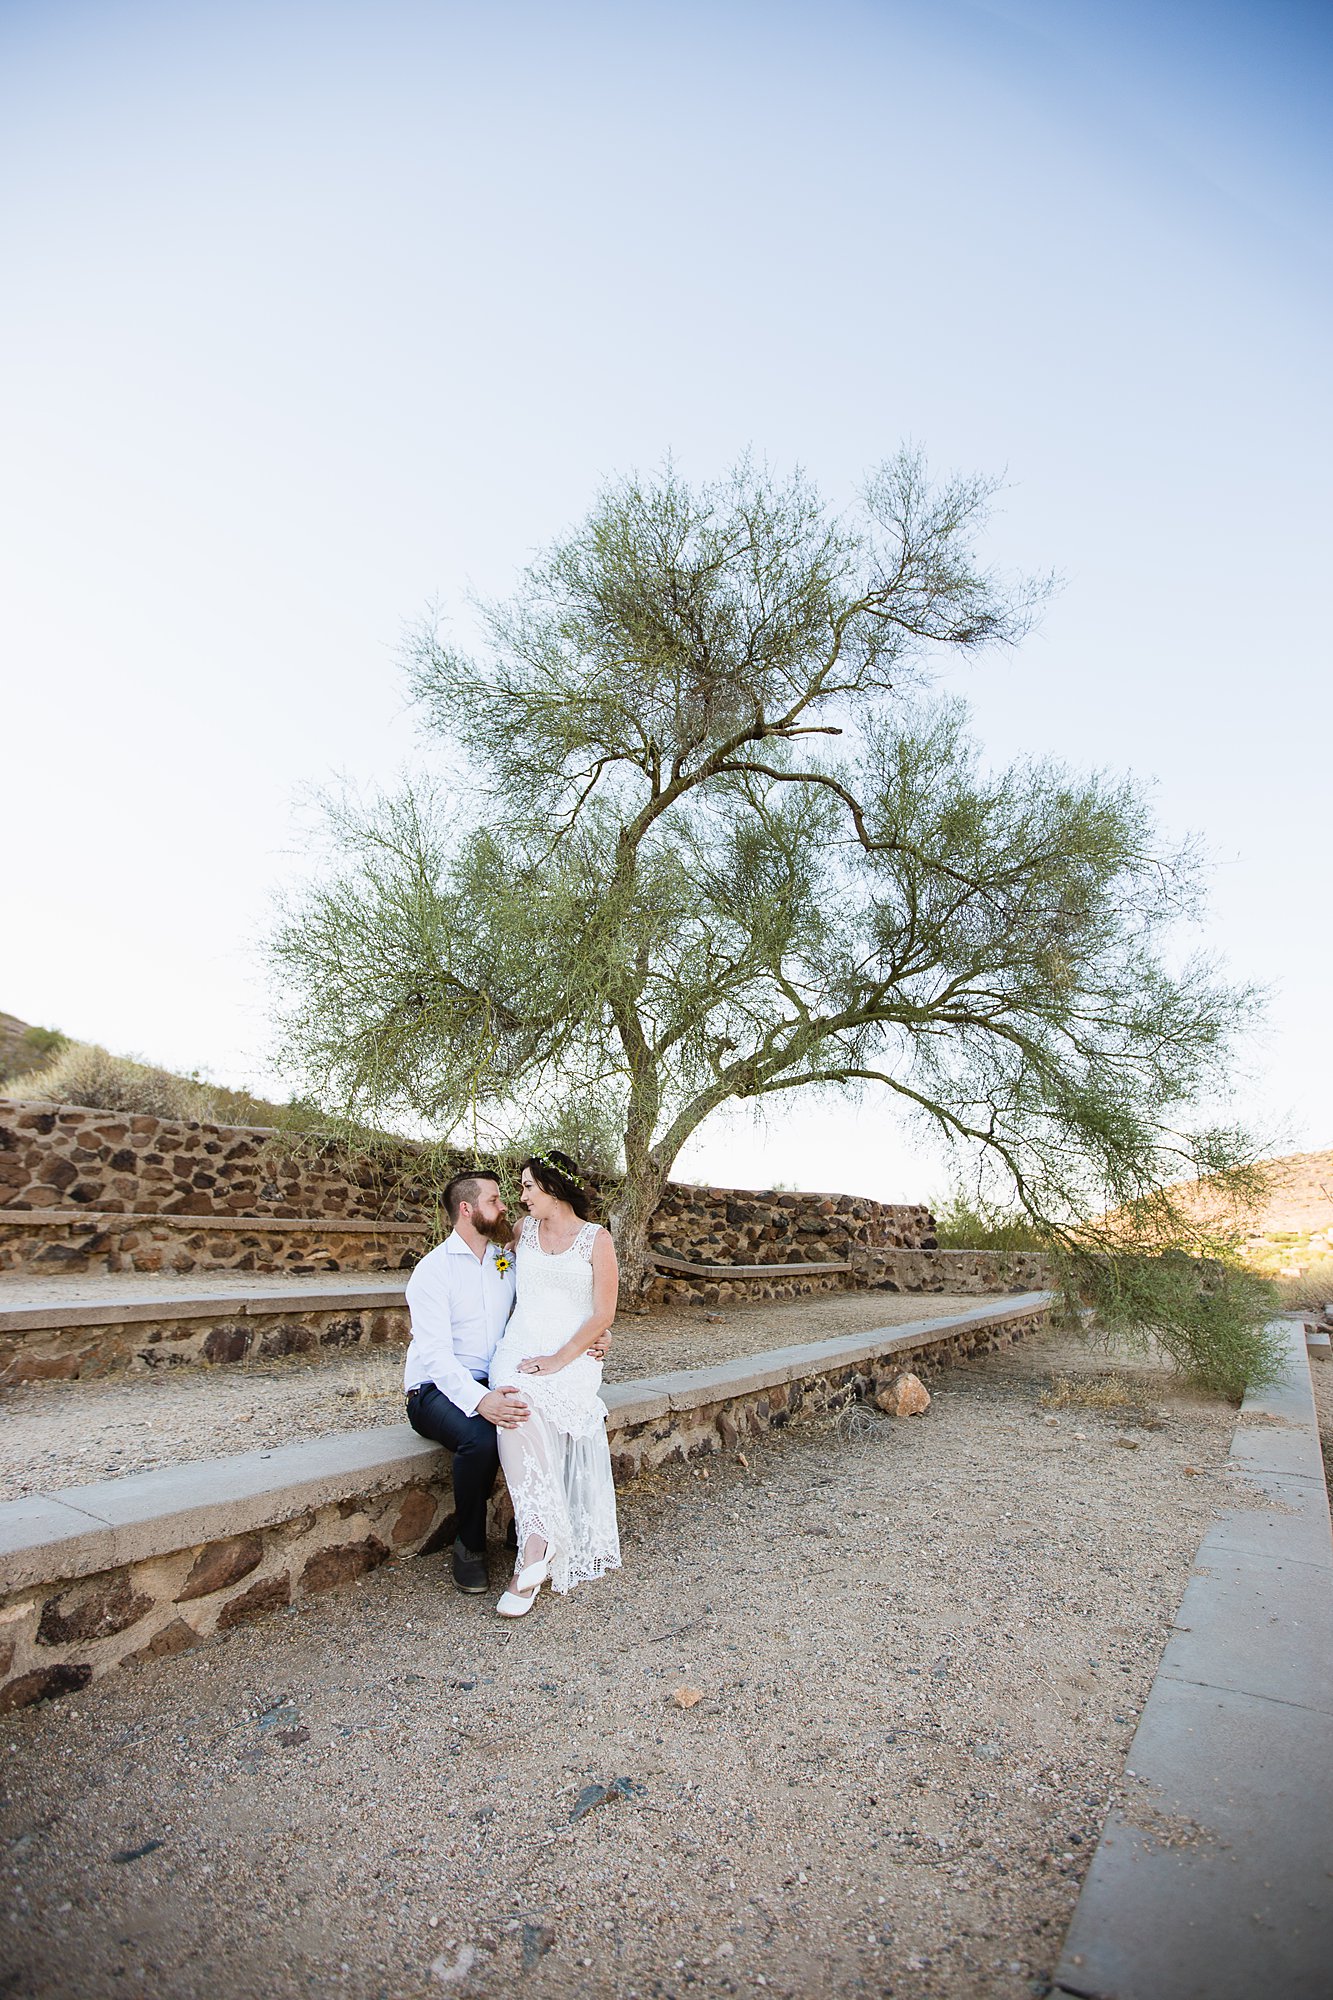 Simple boho bride and groom sitting in front of a tree in the Arizona desert by Phoenix wedding photographers PMA Photography.